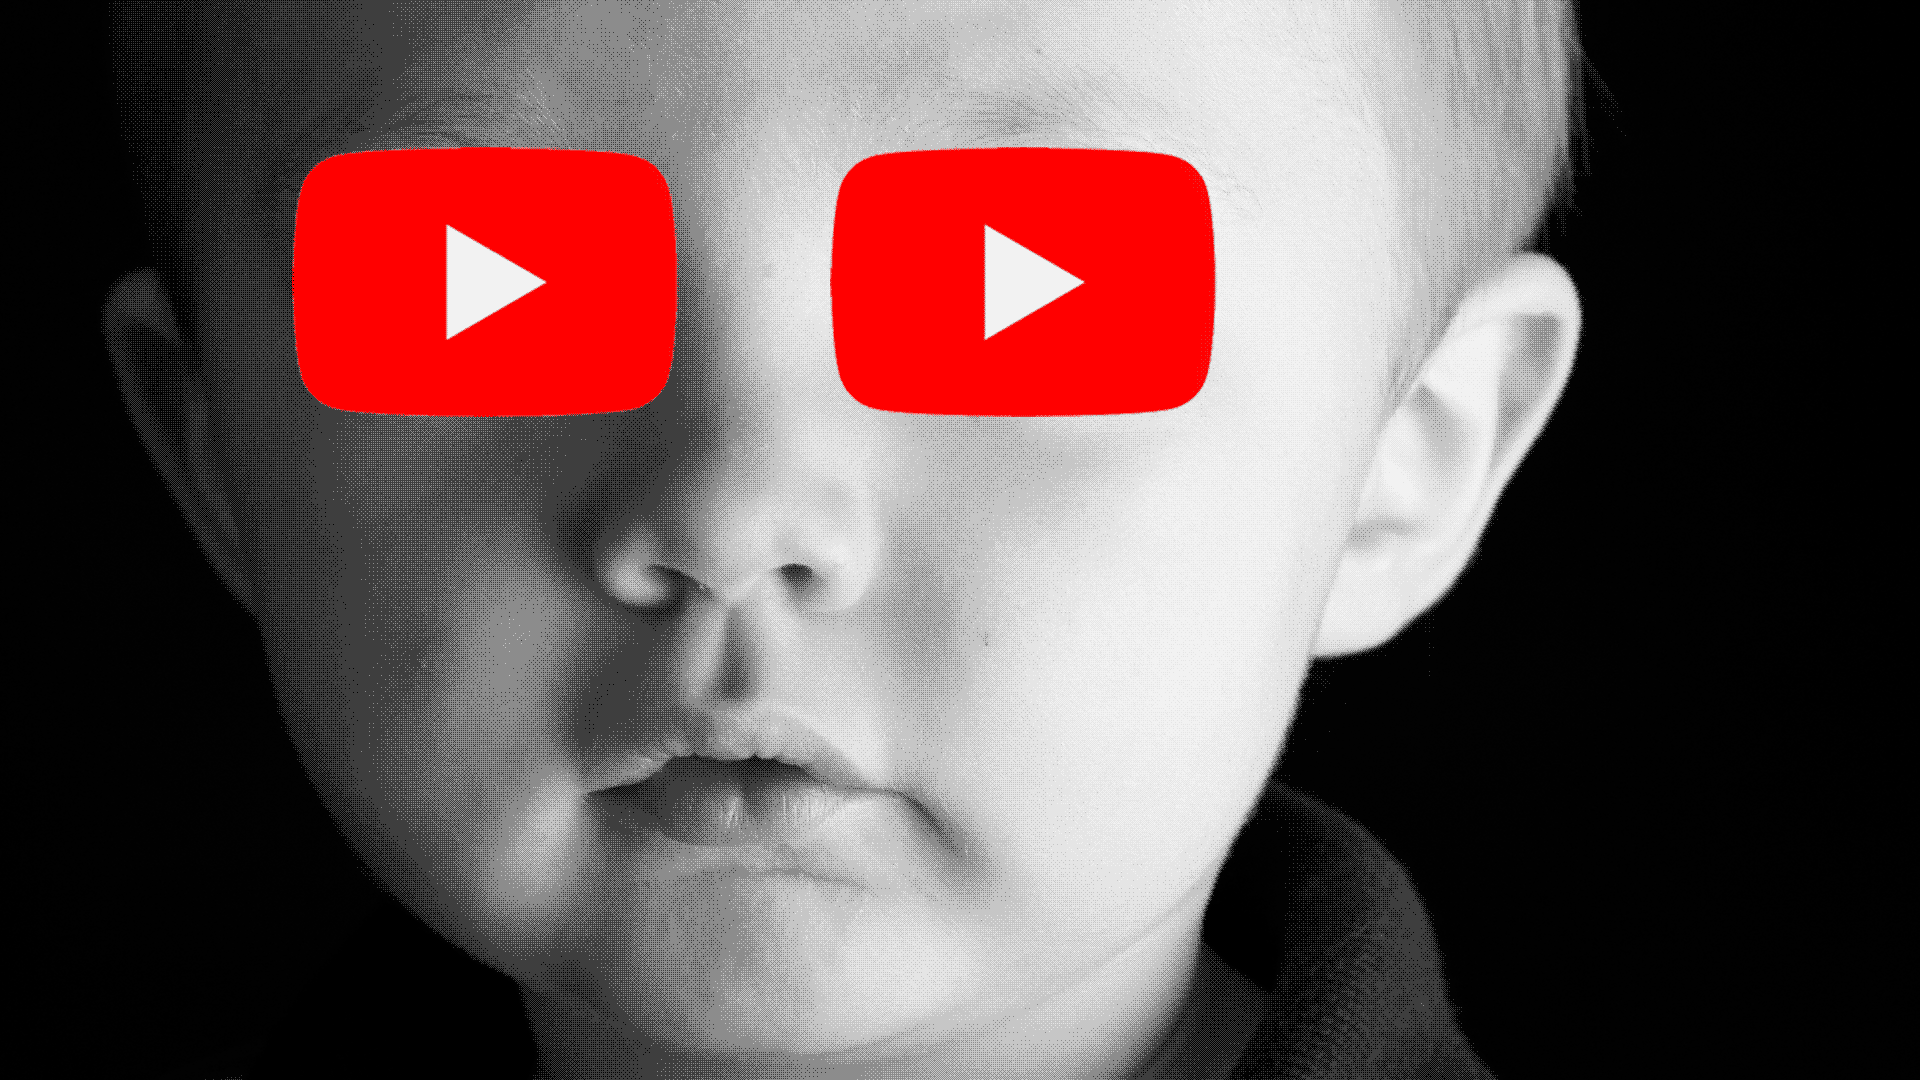 Google to pay $170M over claim that YouTube violated child privacy law - Axios1920 x 1080